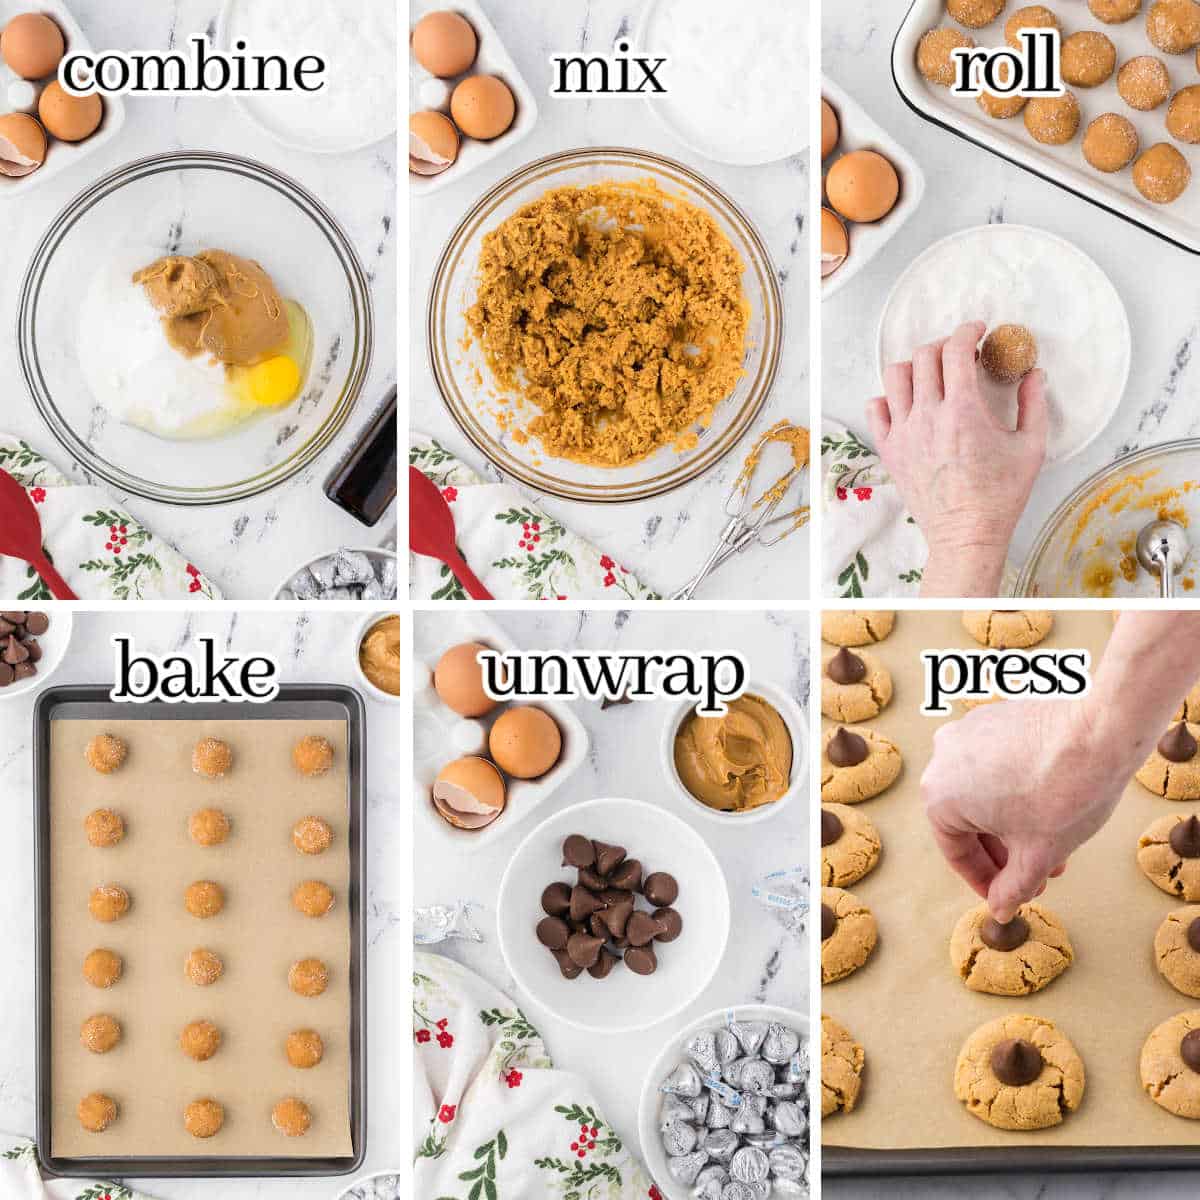 Step-by-step instructions to make the cookie recipe. With print overlay for clarification.